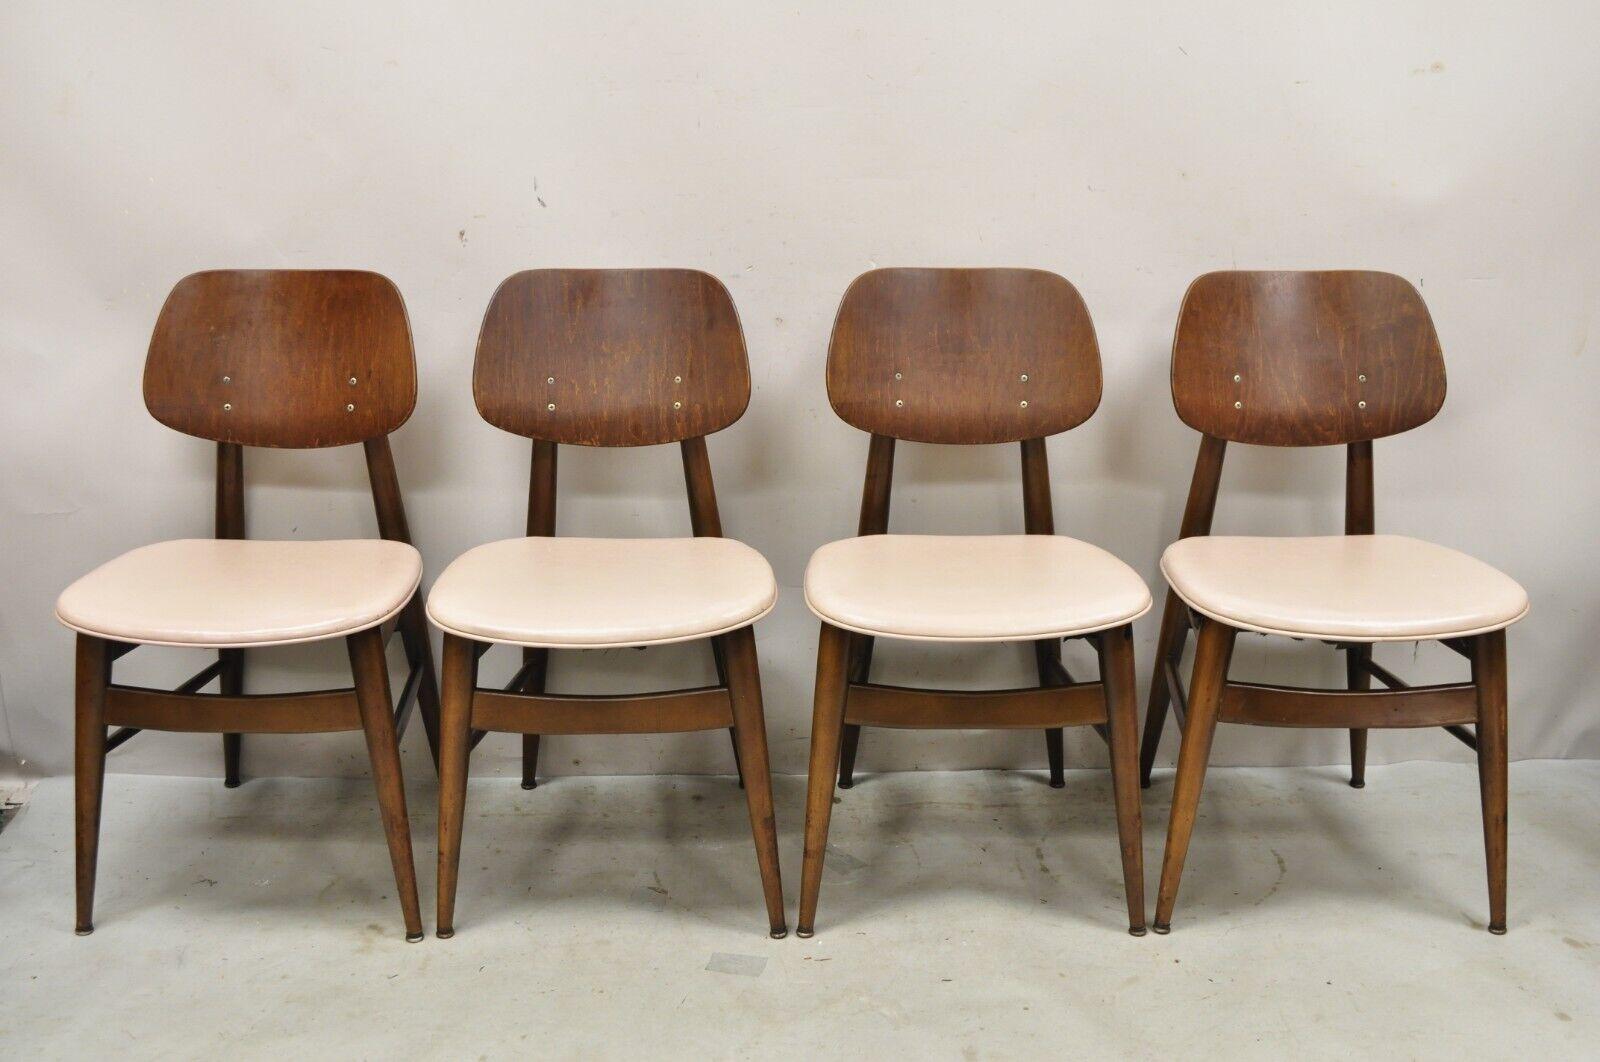 Vintage Thonet Mid Century Modern Bentwood Walnut Dining Chairs - Set of 4. Circa Mid 20th Century. Dimensions : 31,5